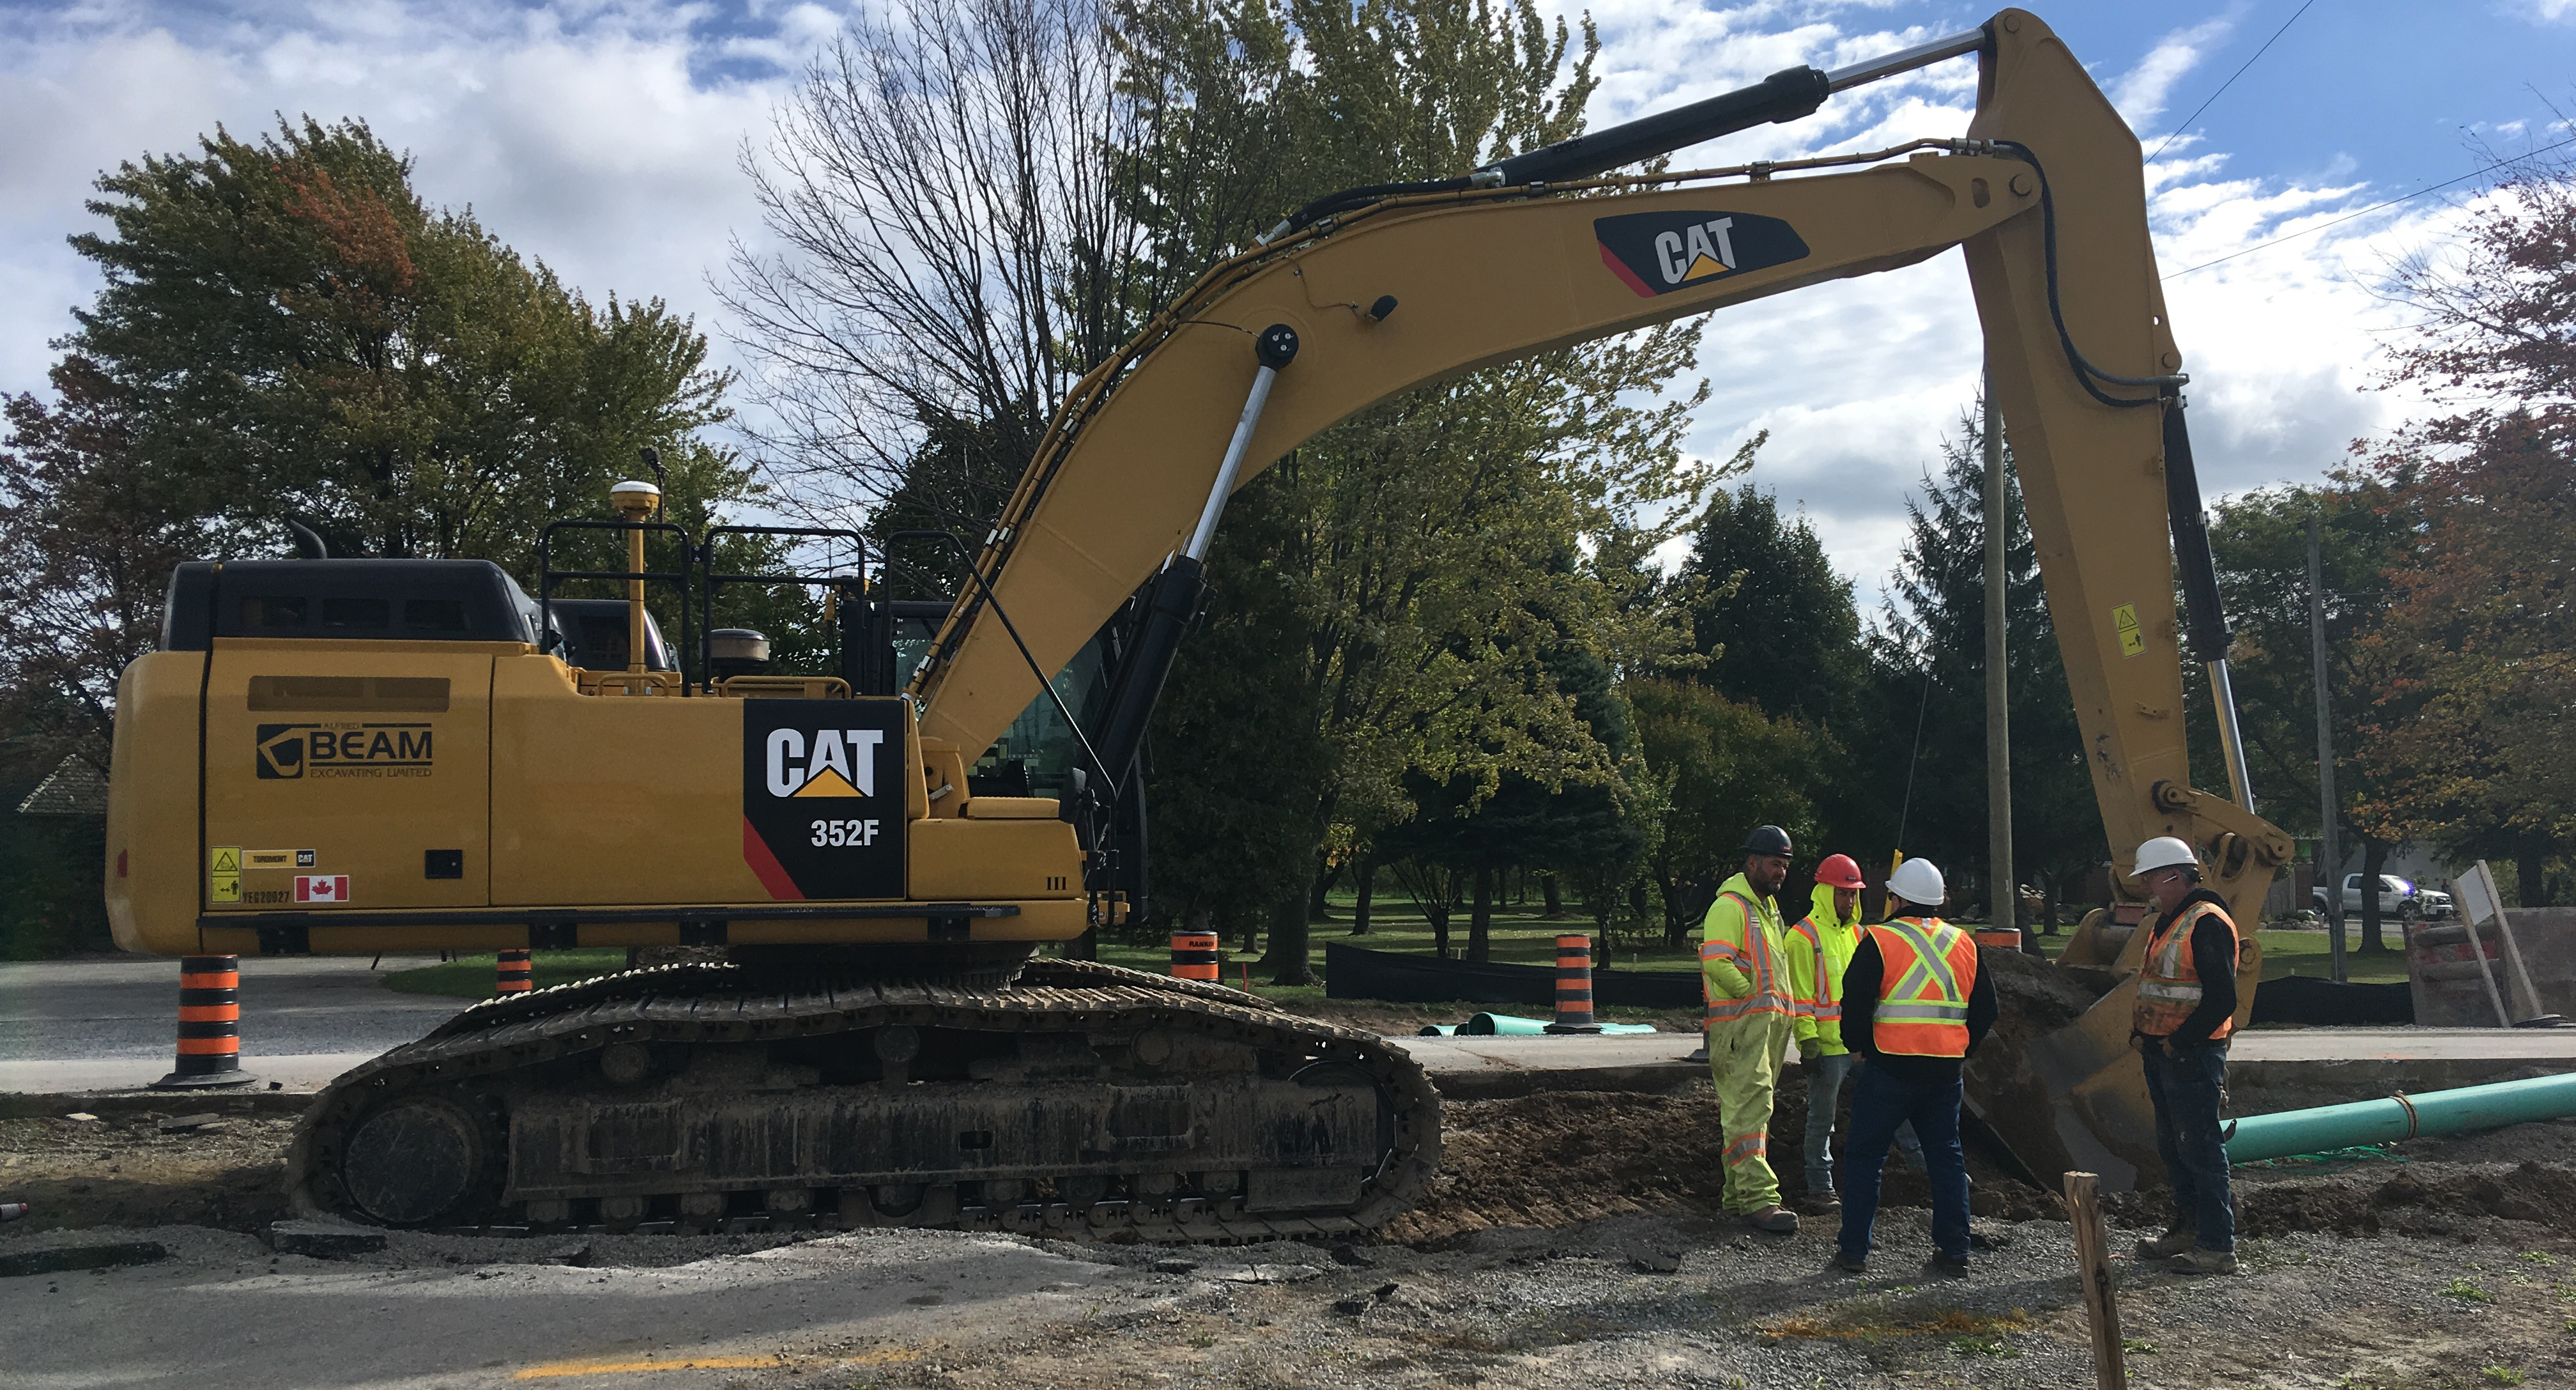 CAT Excavator with construction workers standing near it